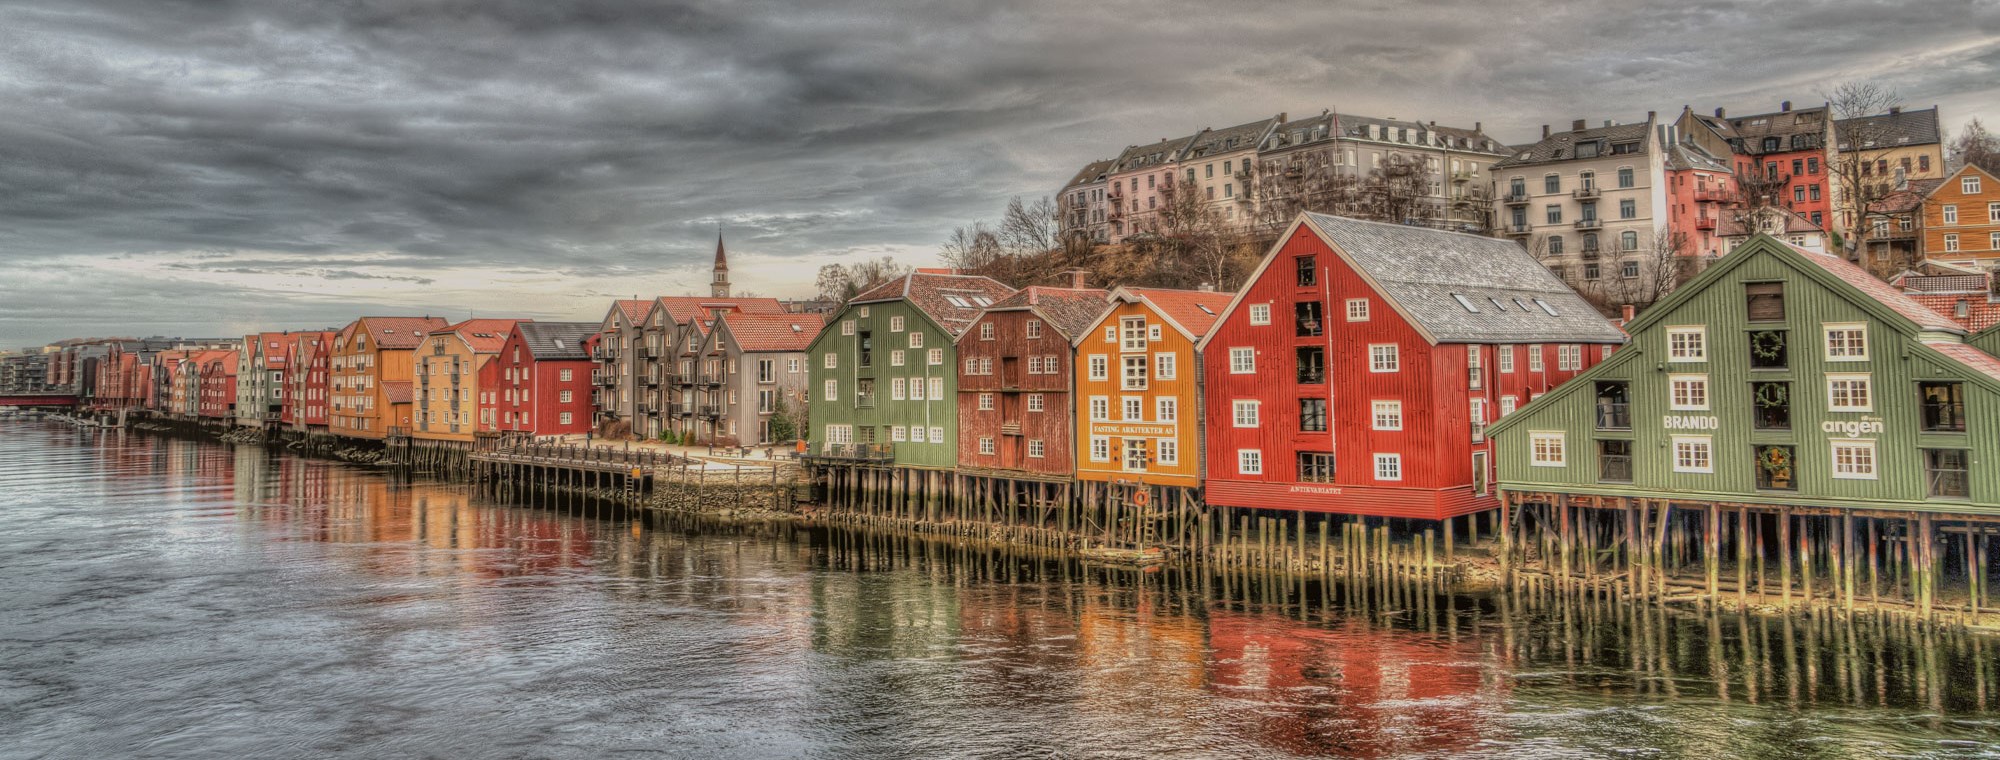 Norway tours of colorful houses, Trondheim